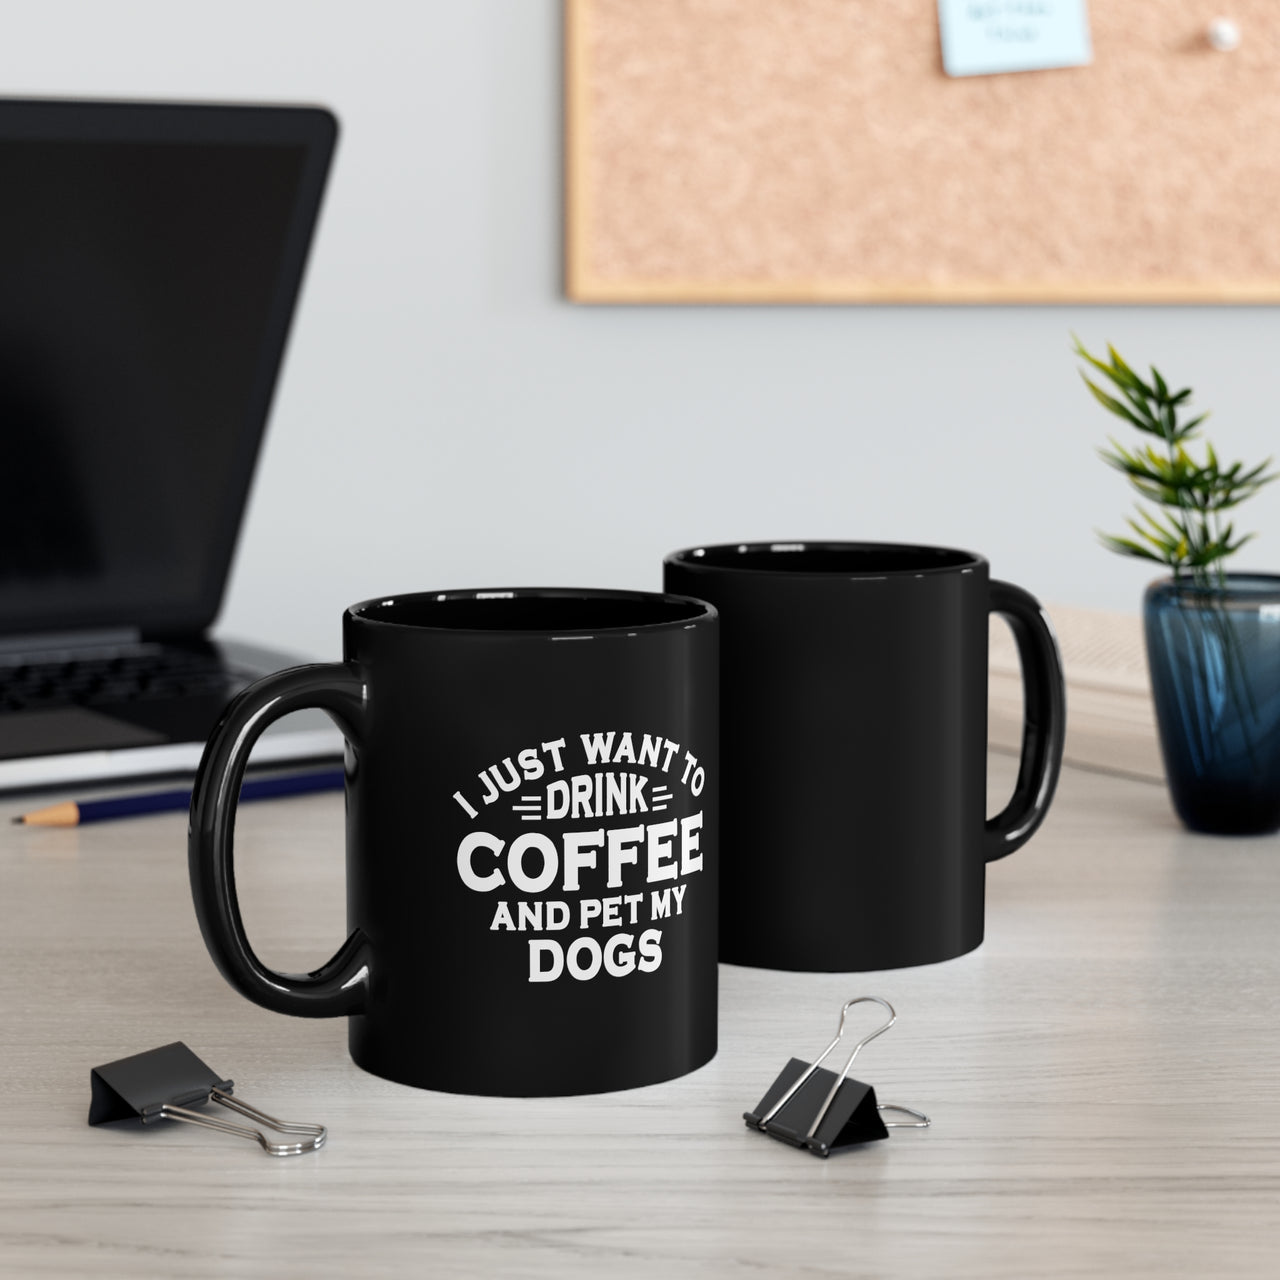 I Just Want To Drink Coffee and Pet My Dogs 🐶🐶 11oz Black Mug